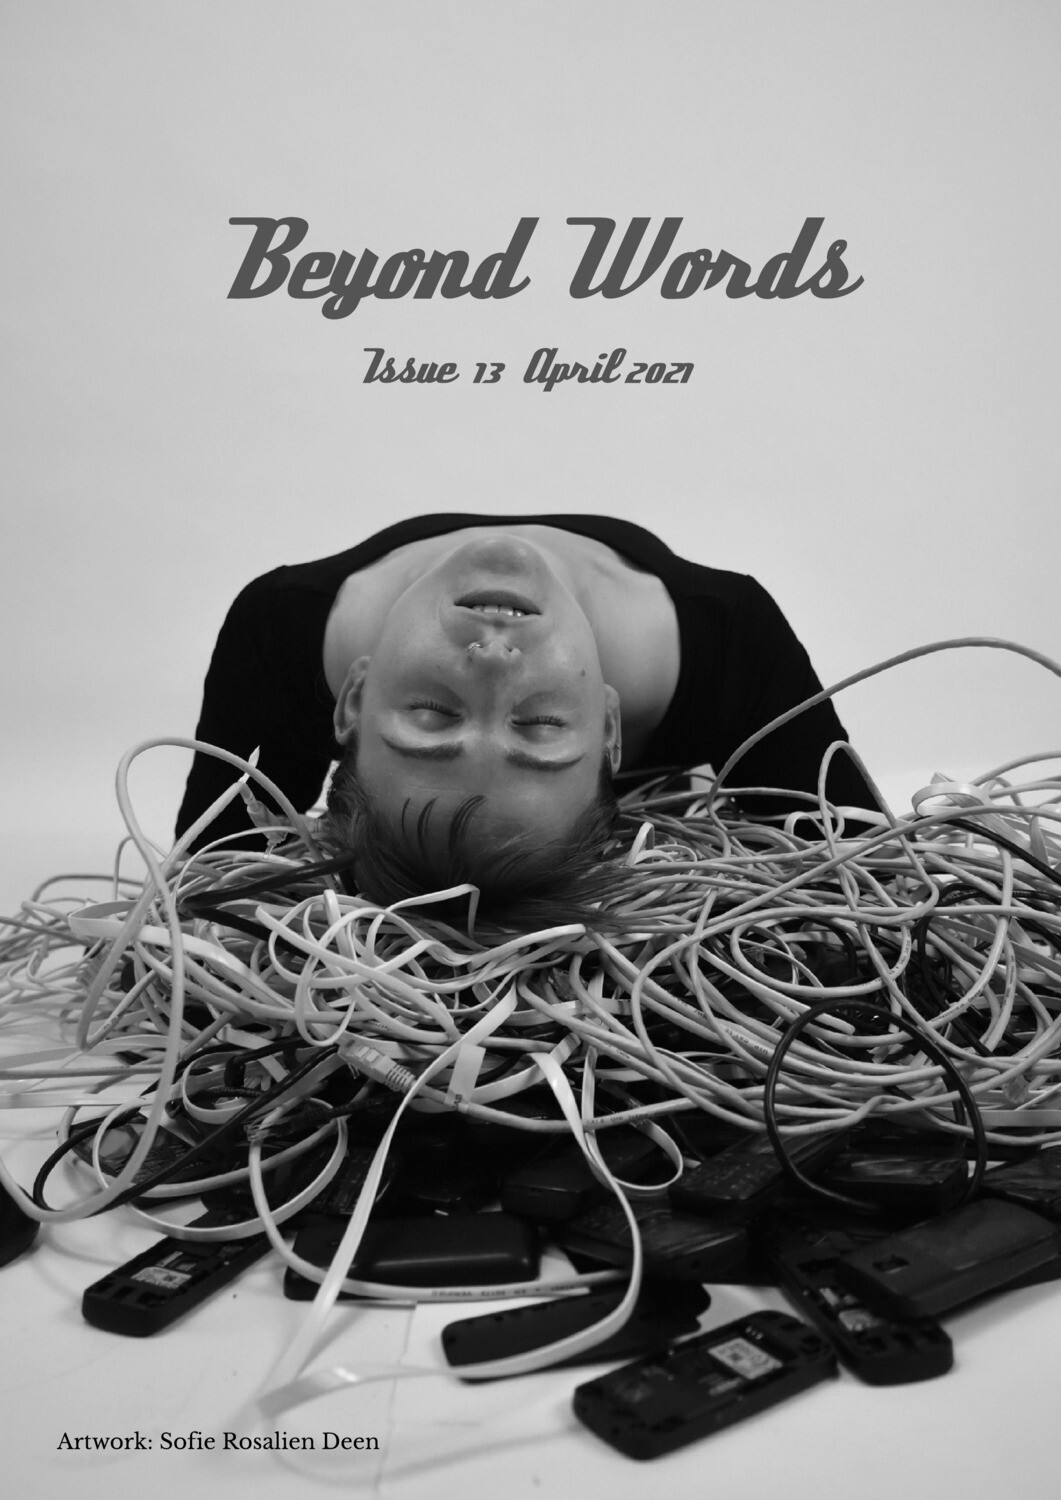 Beyond Words Magazine, Issue 13, April 2021